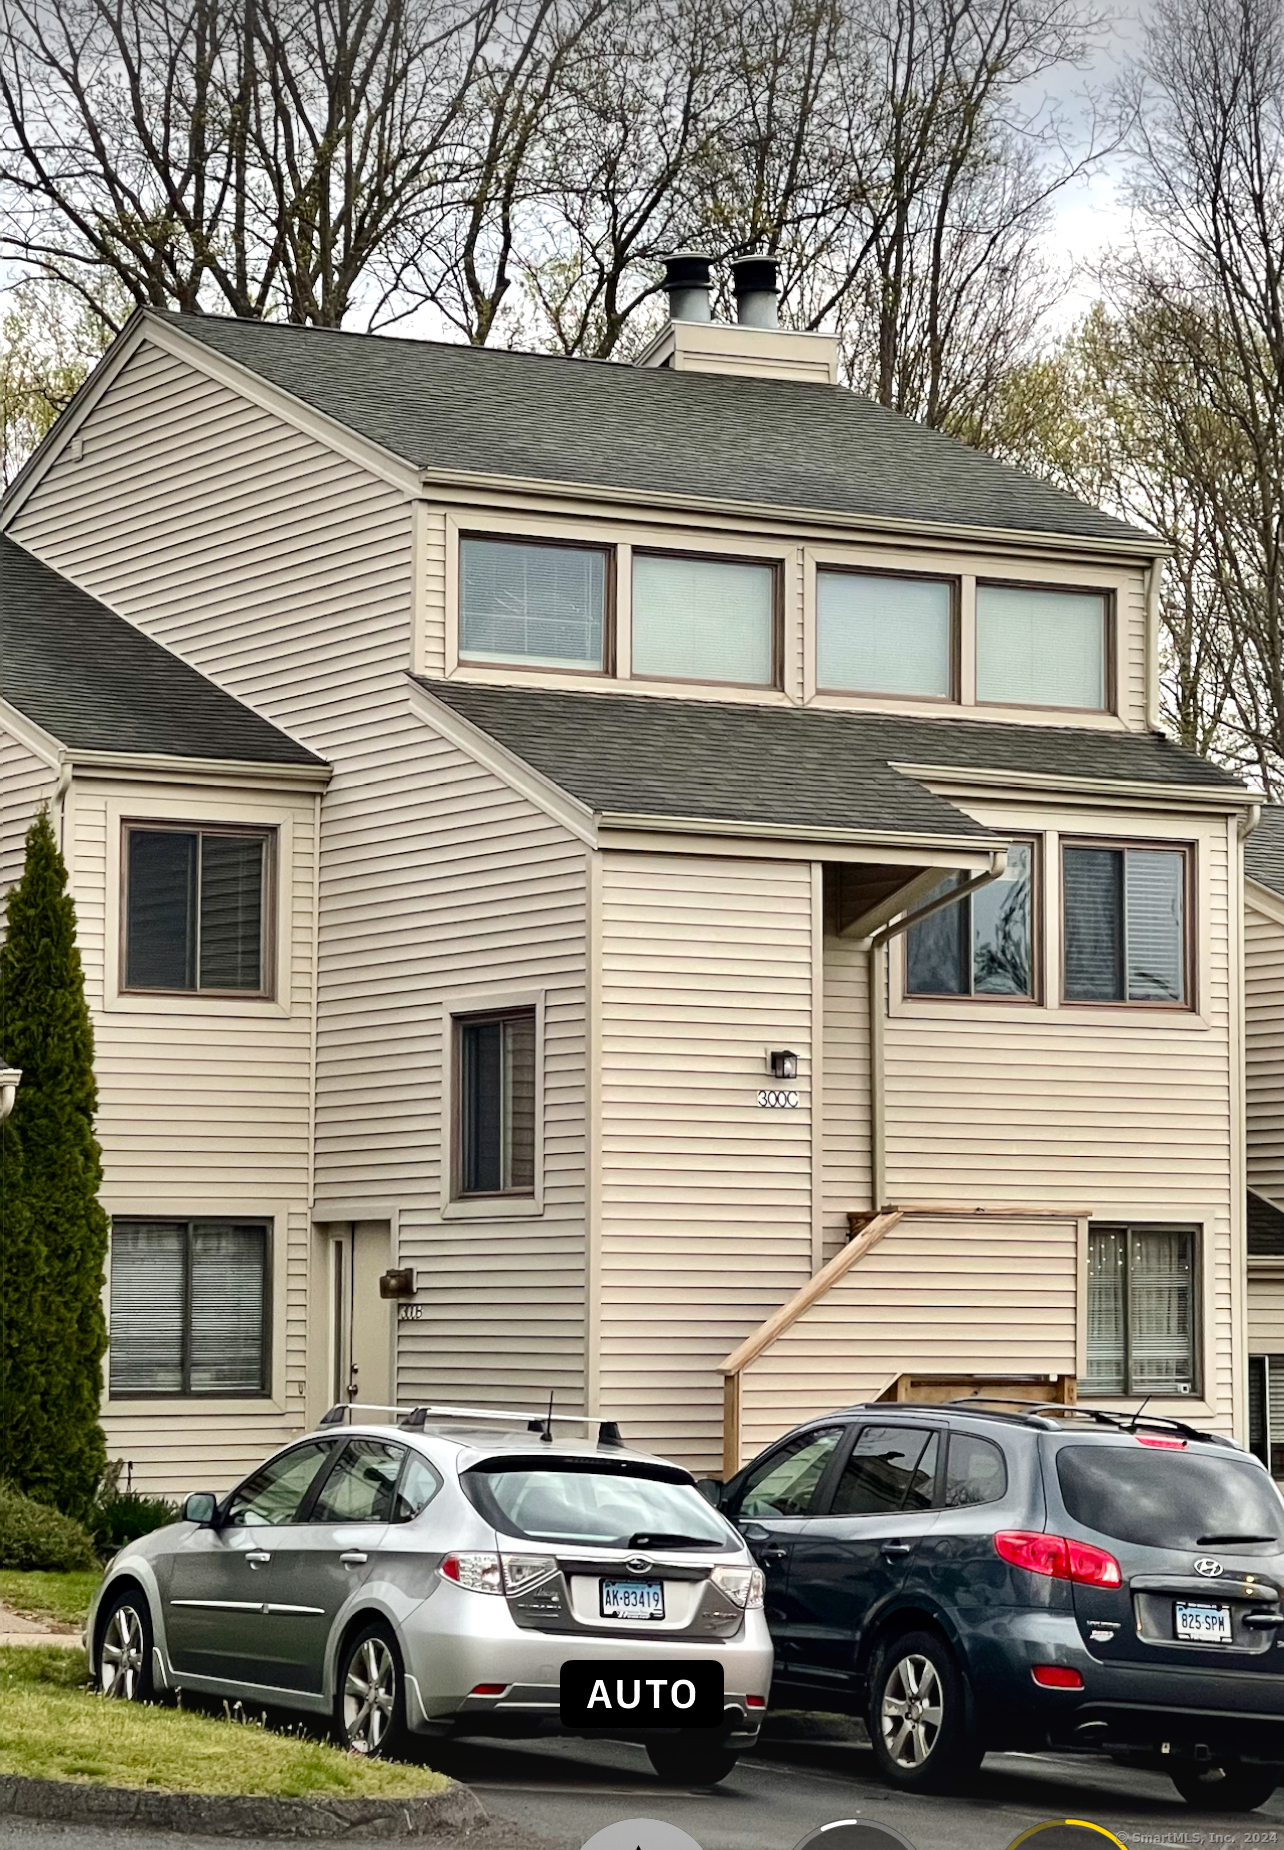 300 Brittany Farms Road C, New Britain, Connecticut - 3 Bedrooms  
2 Bathrooms  
7 Rooms - 